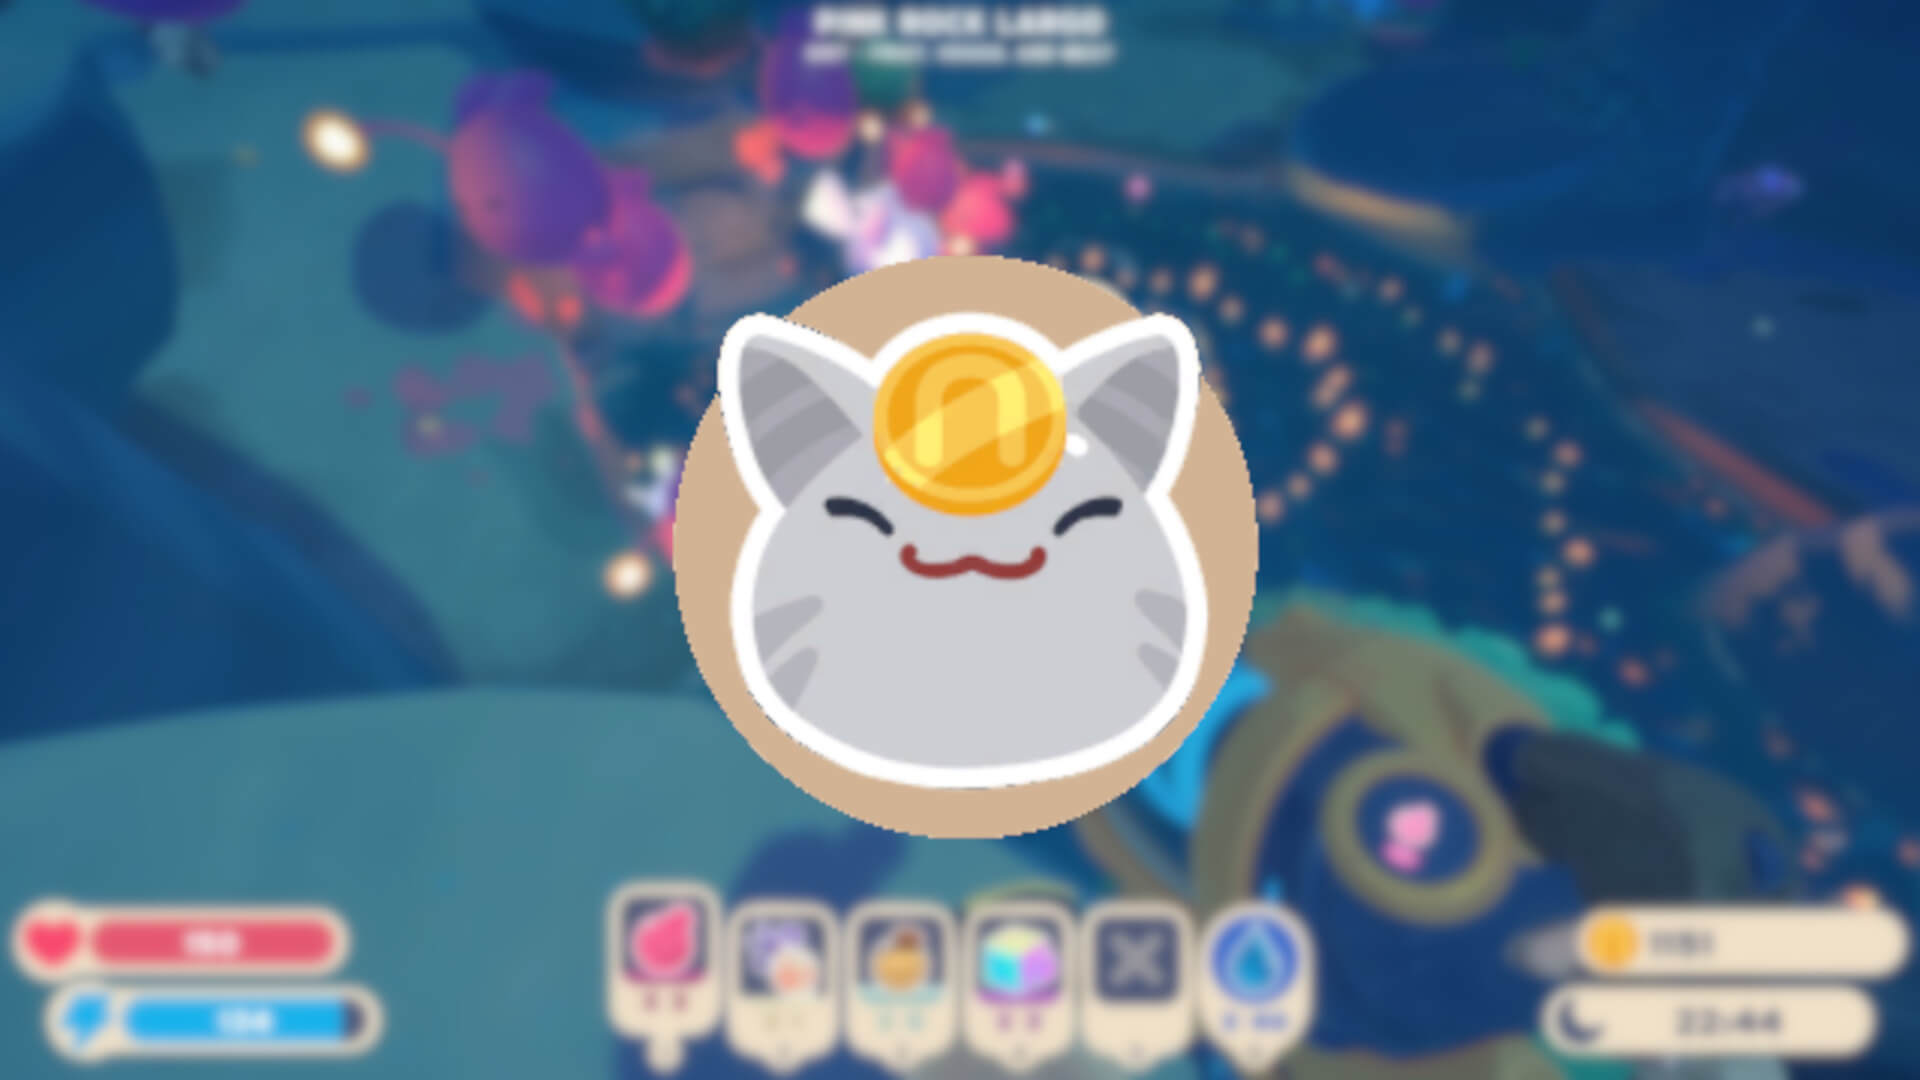 Images of the different types of special slimes in Slime Rancher 2